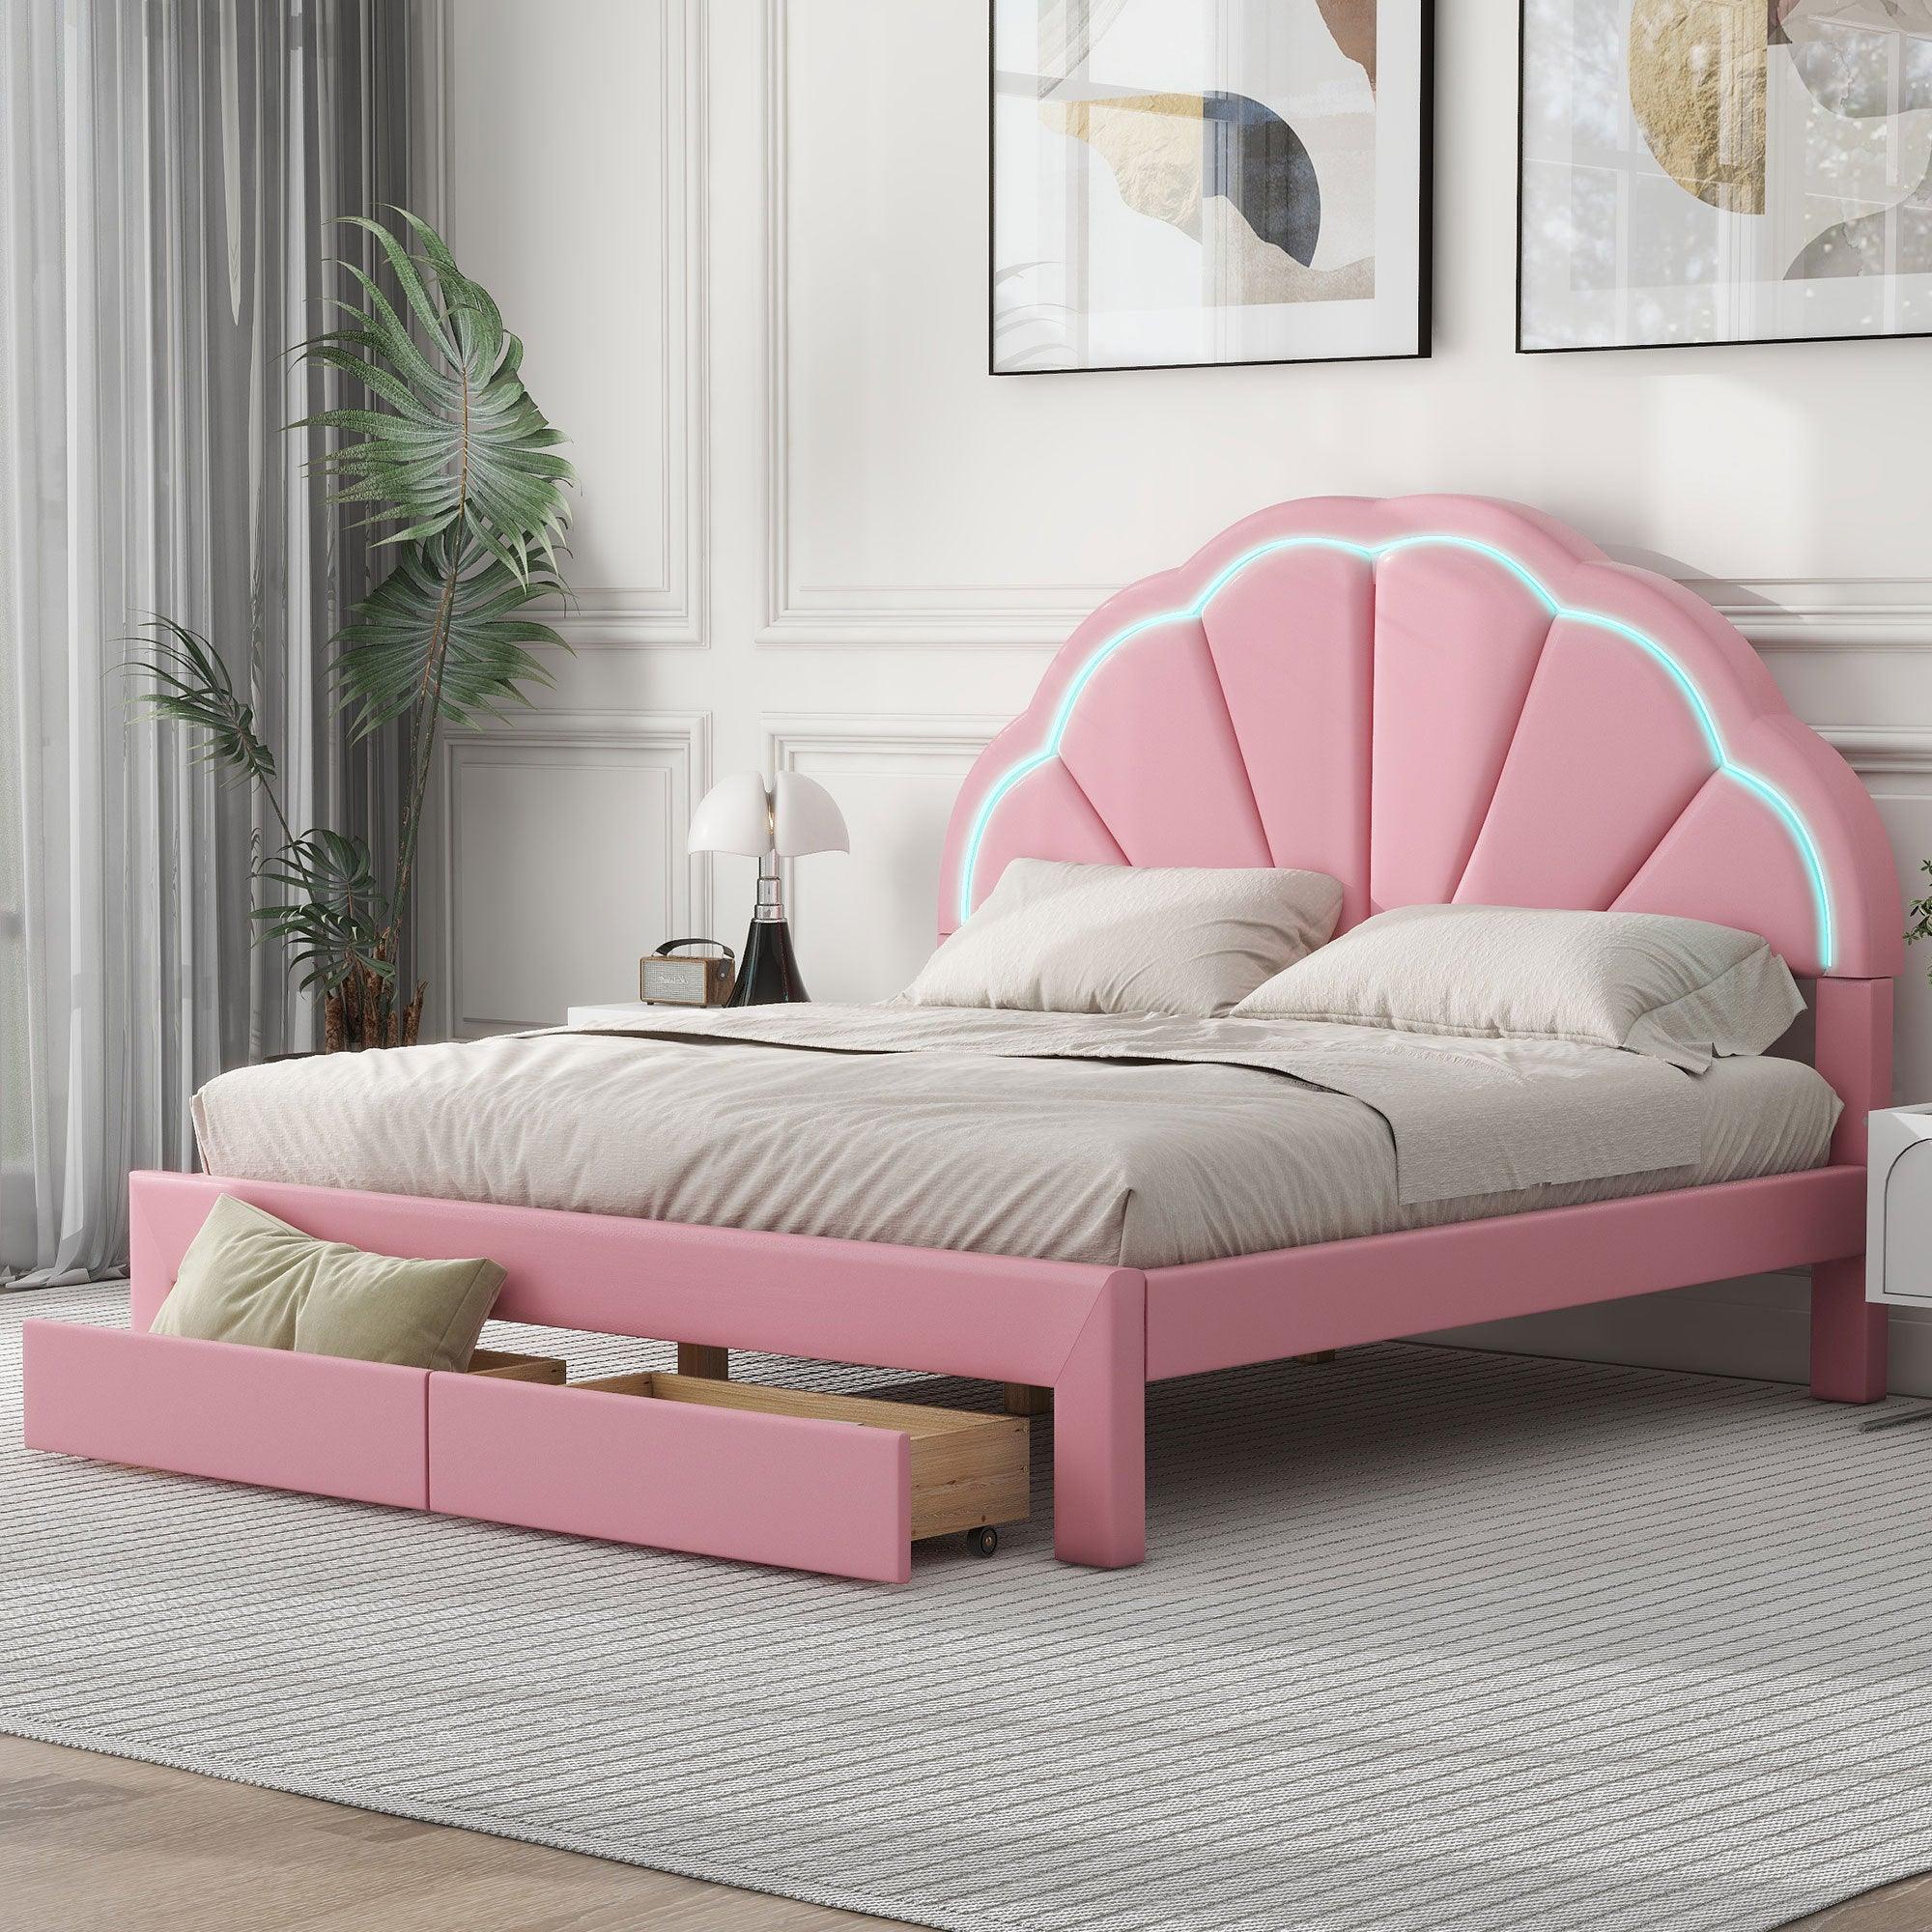 🆓🚛 Queen Size Upholstered Platform Bed With Seashell Shaped Headboard, Led & 2 Drawers, Pink